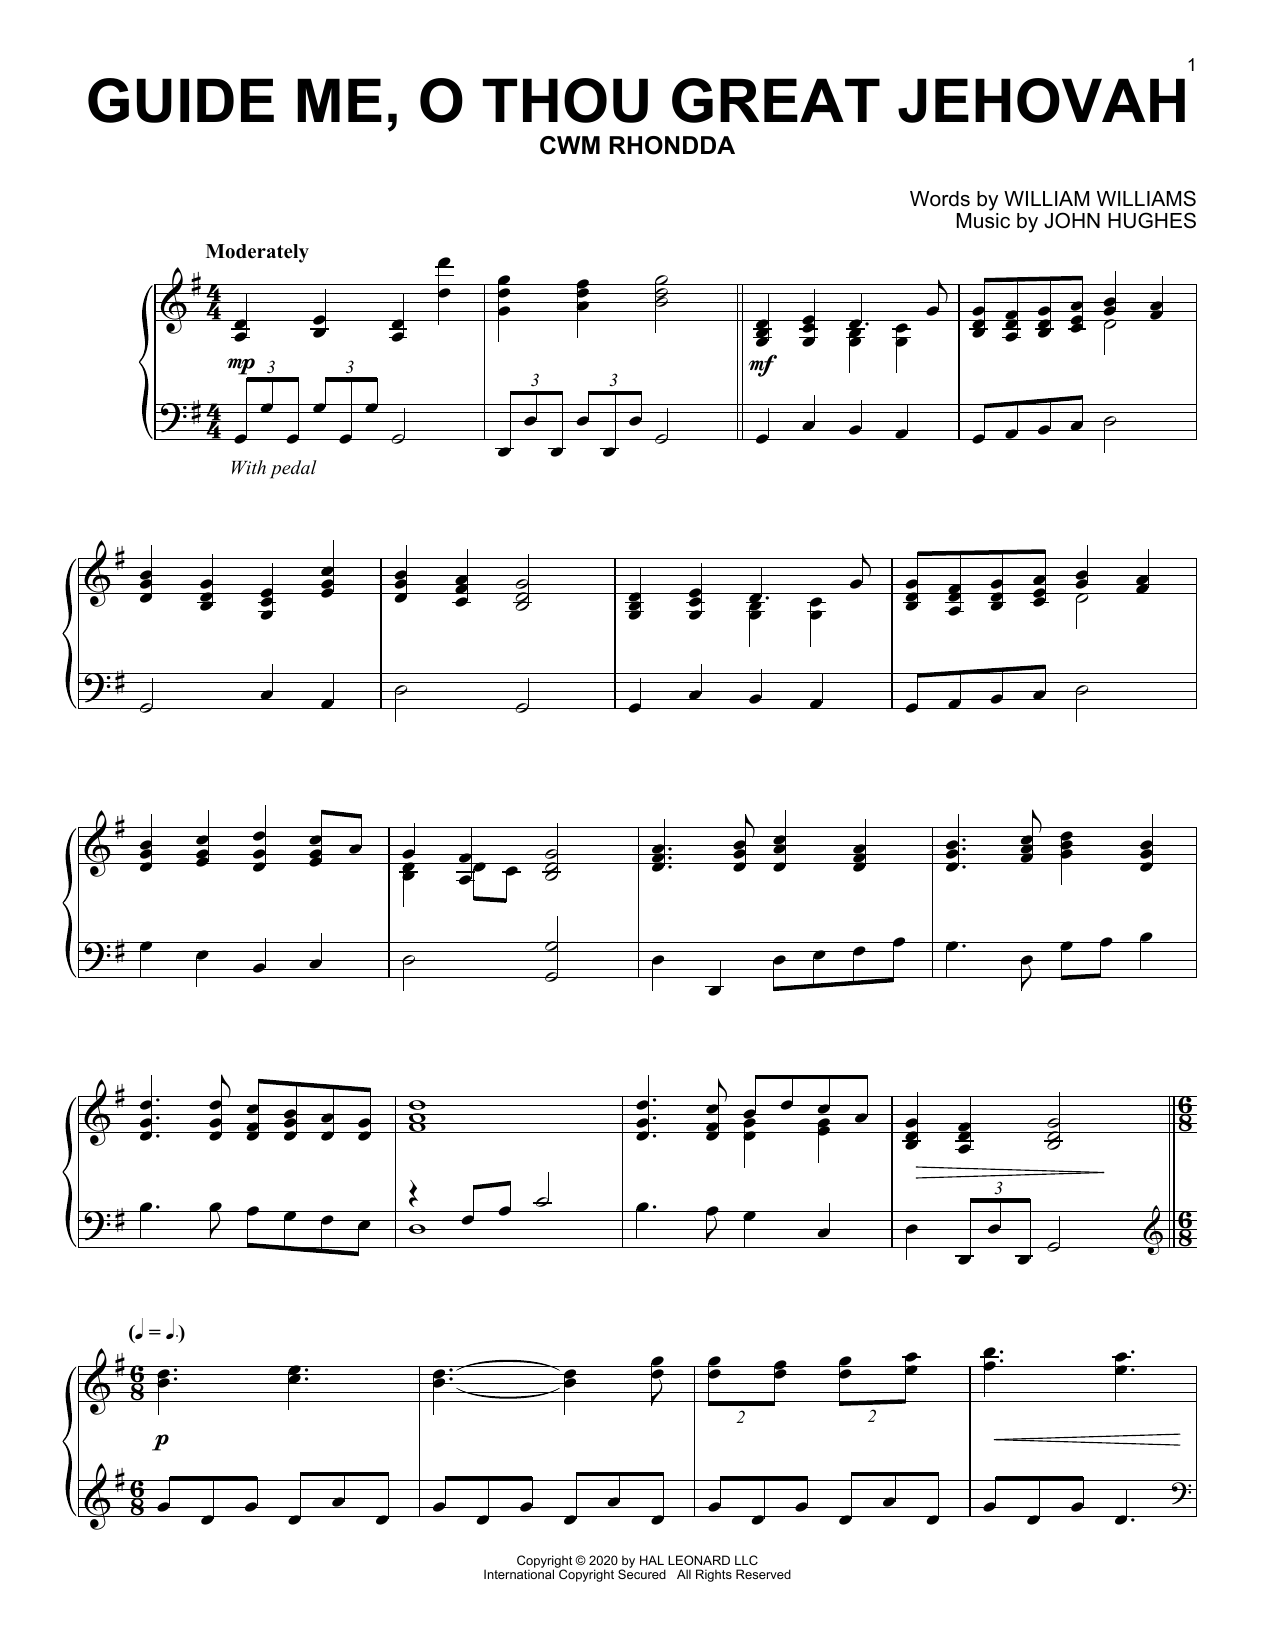 Download William Williams and John Hughes Guide Me, O Thou Great Jehovah Sheet Music